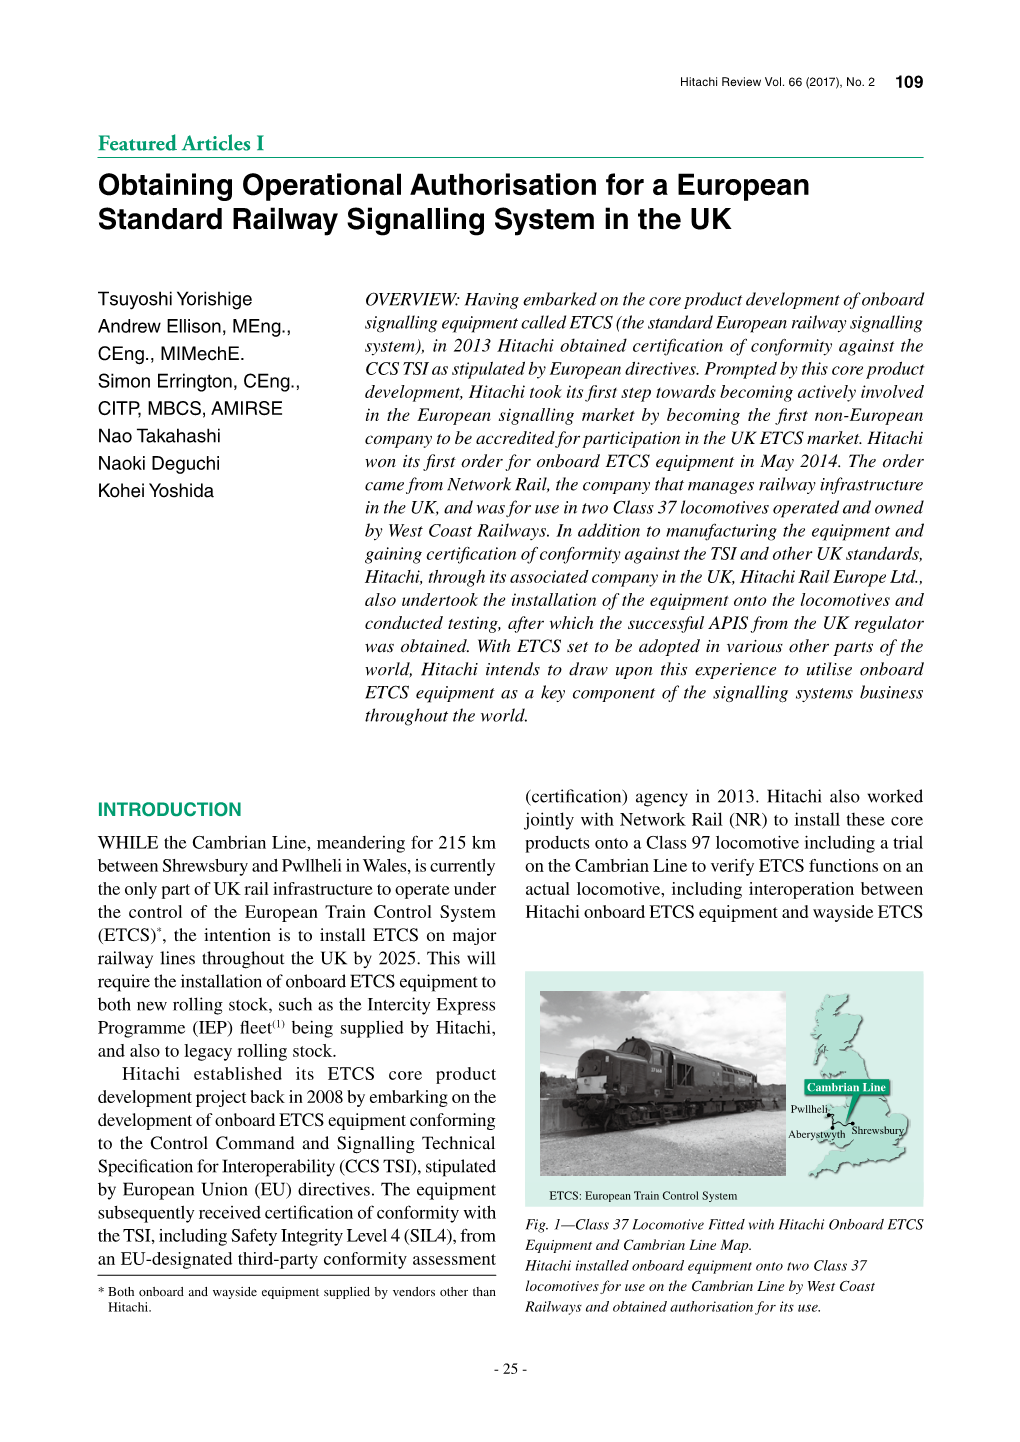 Obtaining Operational Authorisation for a European Standard Railway Signalling System in the UK